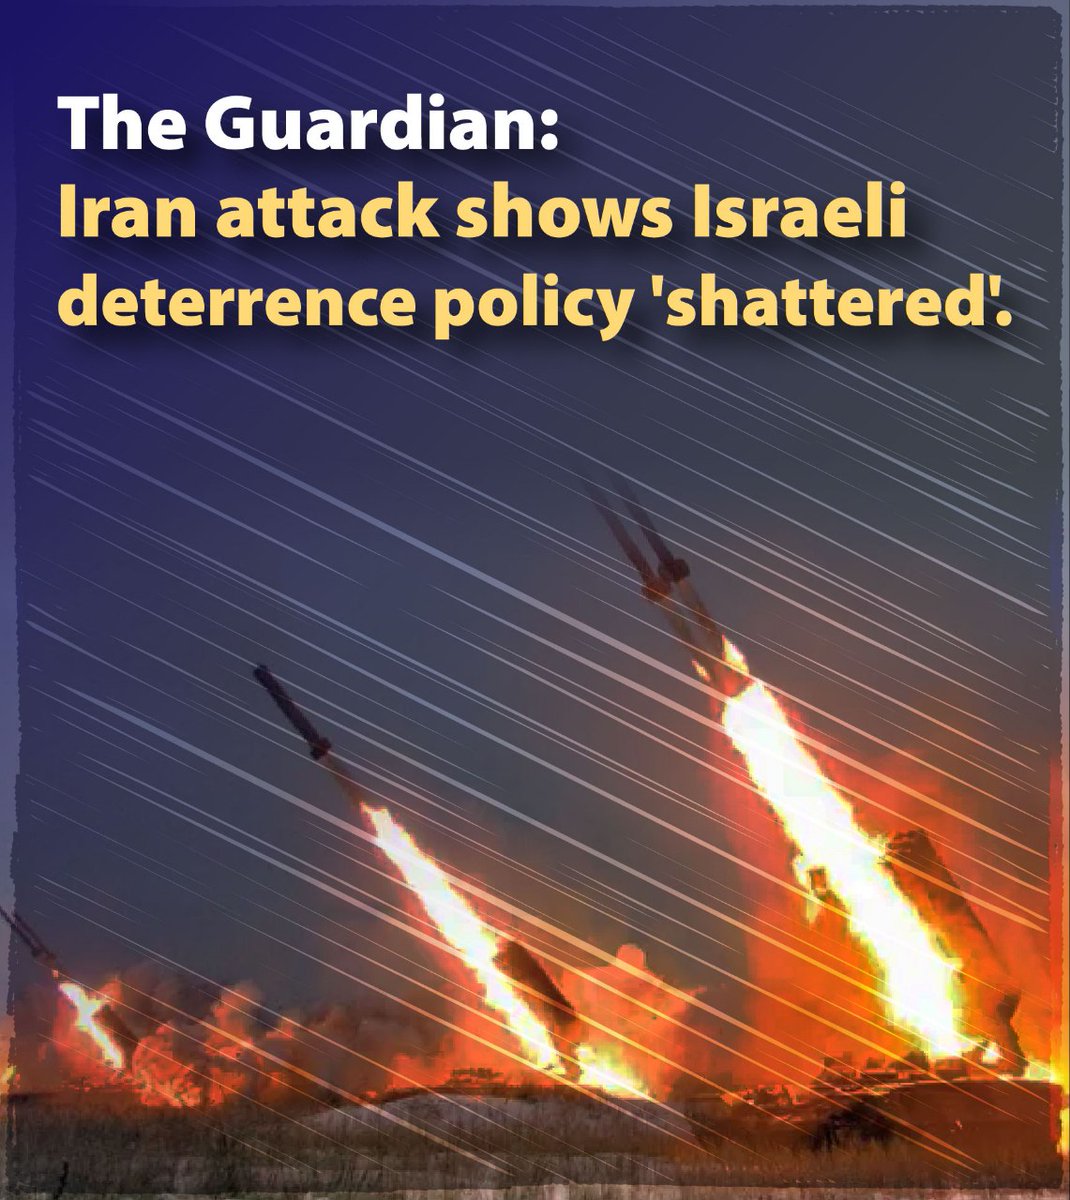 Iran's attack shows that Israel's deterrence policy has failed